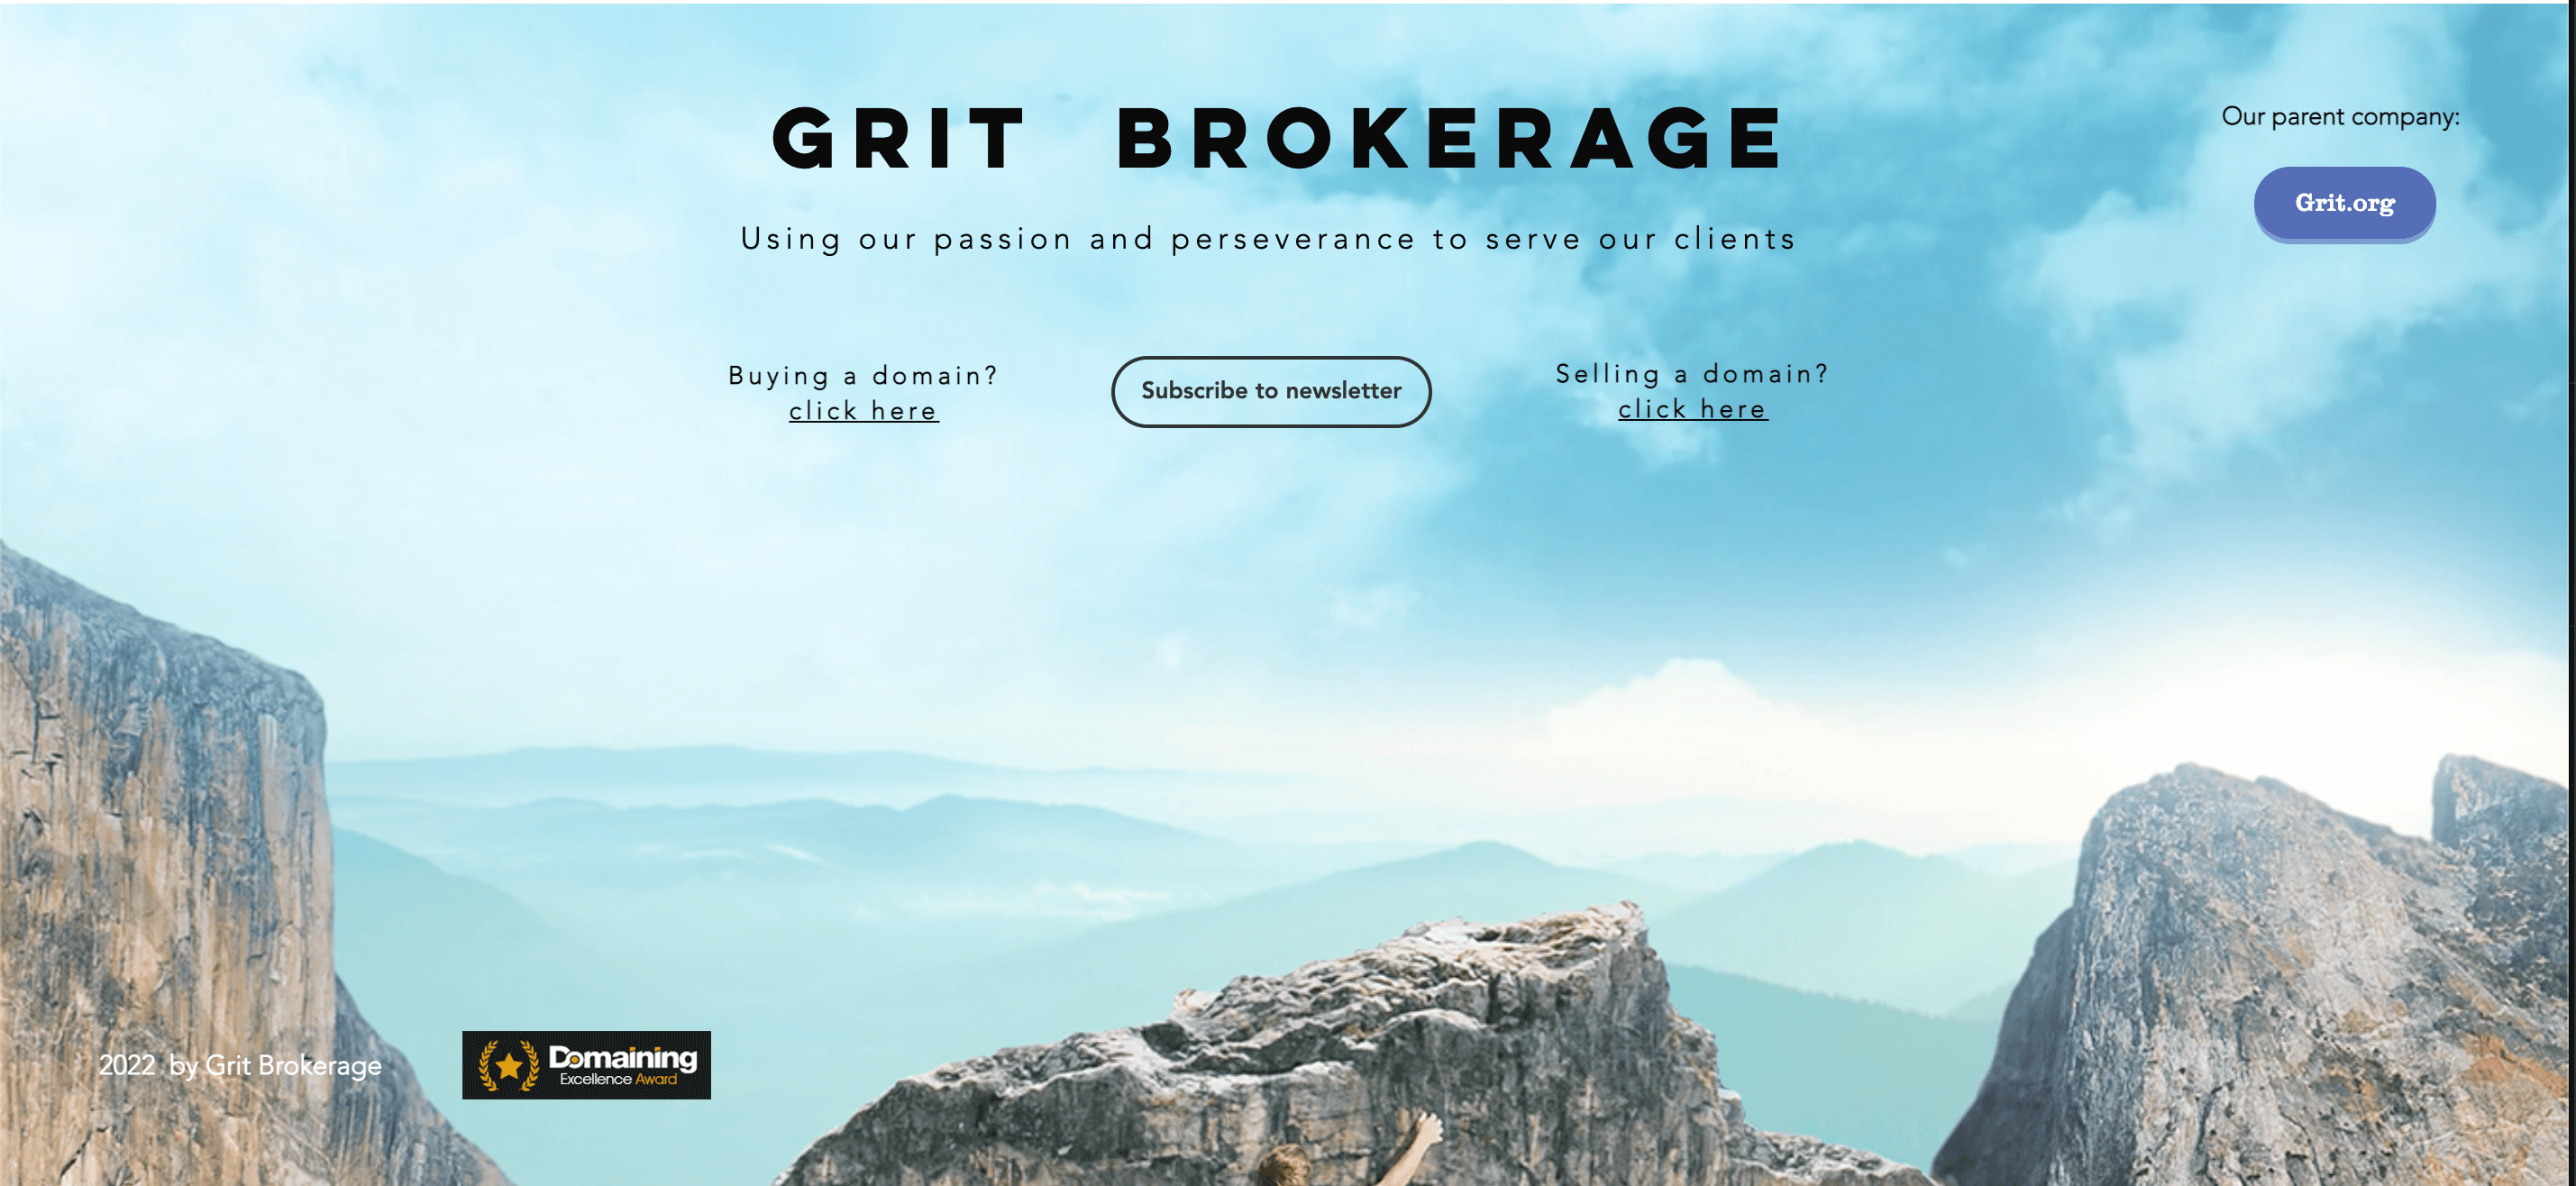 Grit brokerage's home page